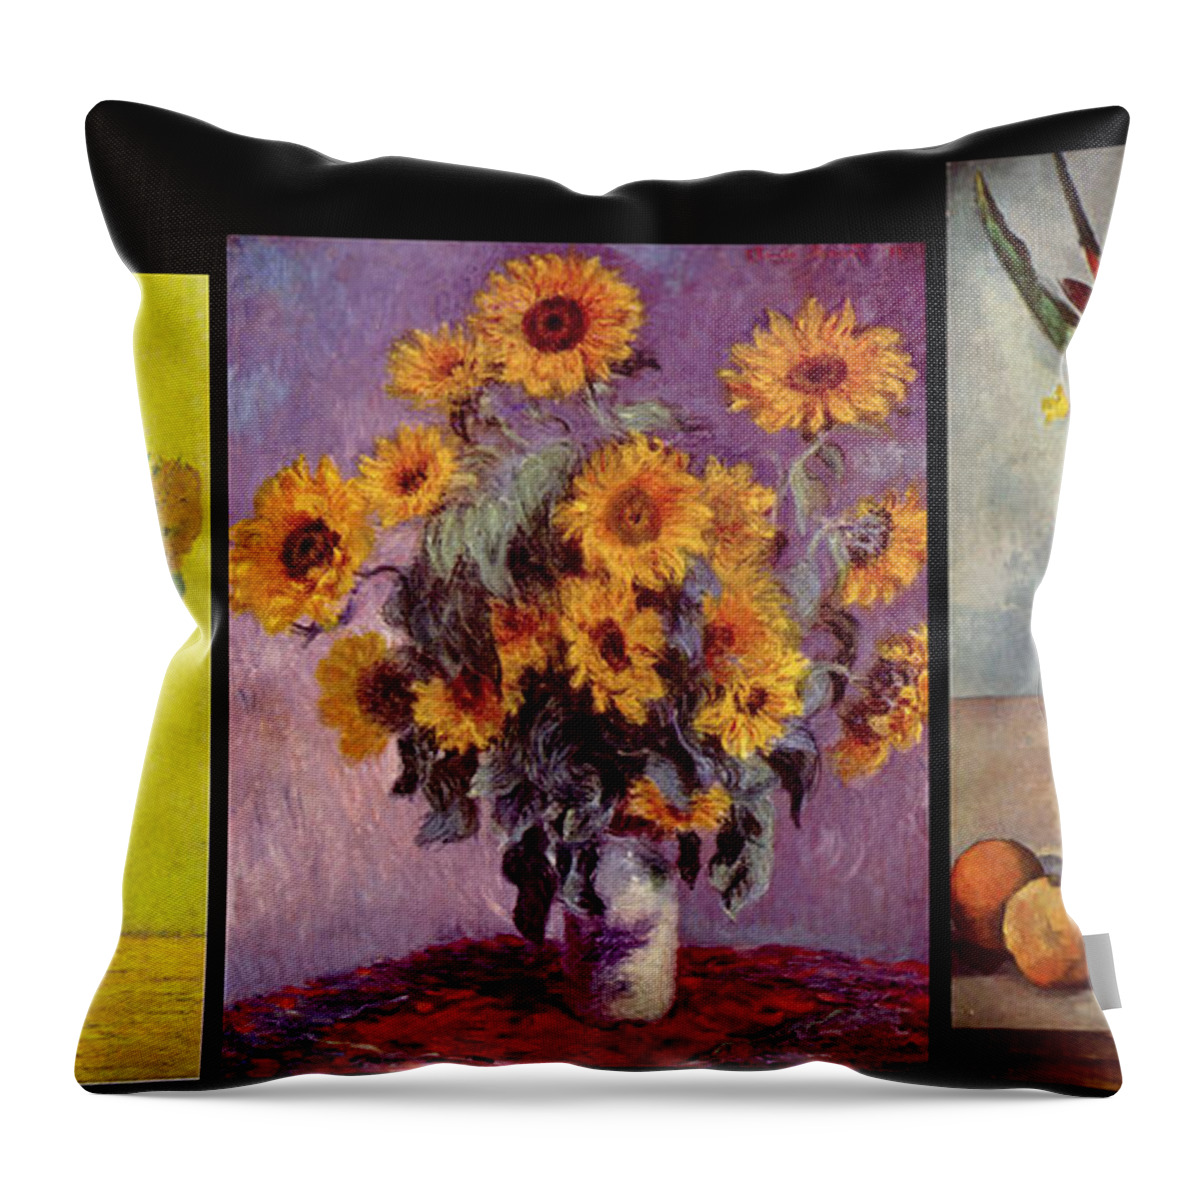 Abstract In The Living Room Throw Pillow featuring the digital art Three Vases van Gogh - Monet - Cezanne by David Bridburg